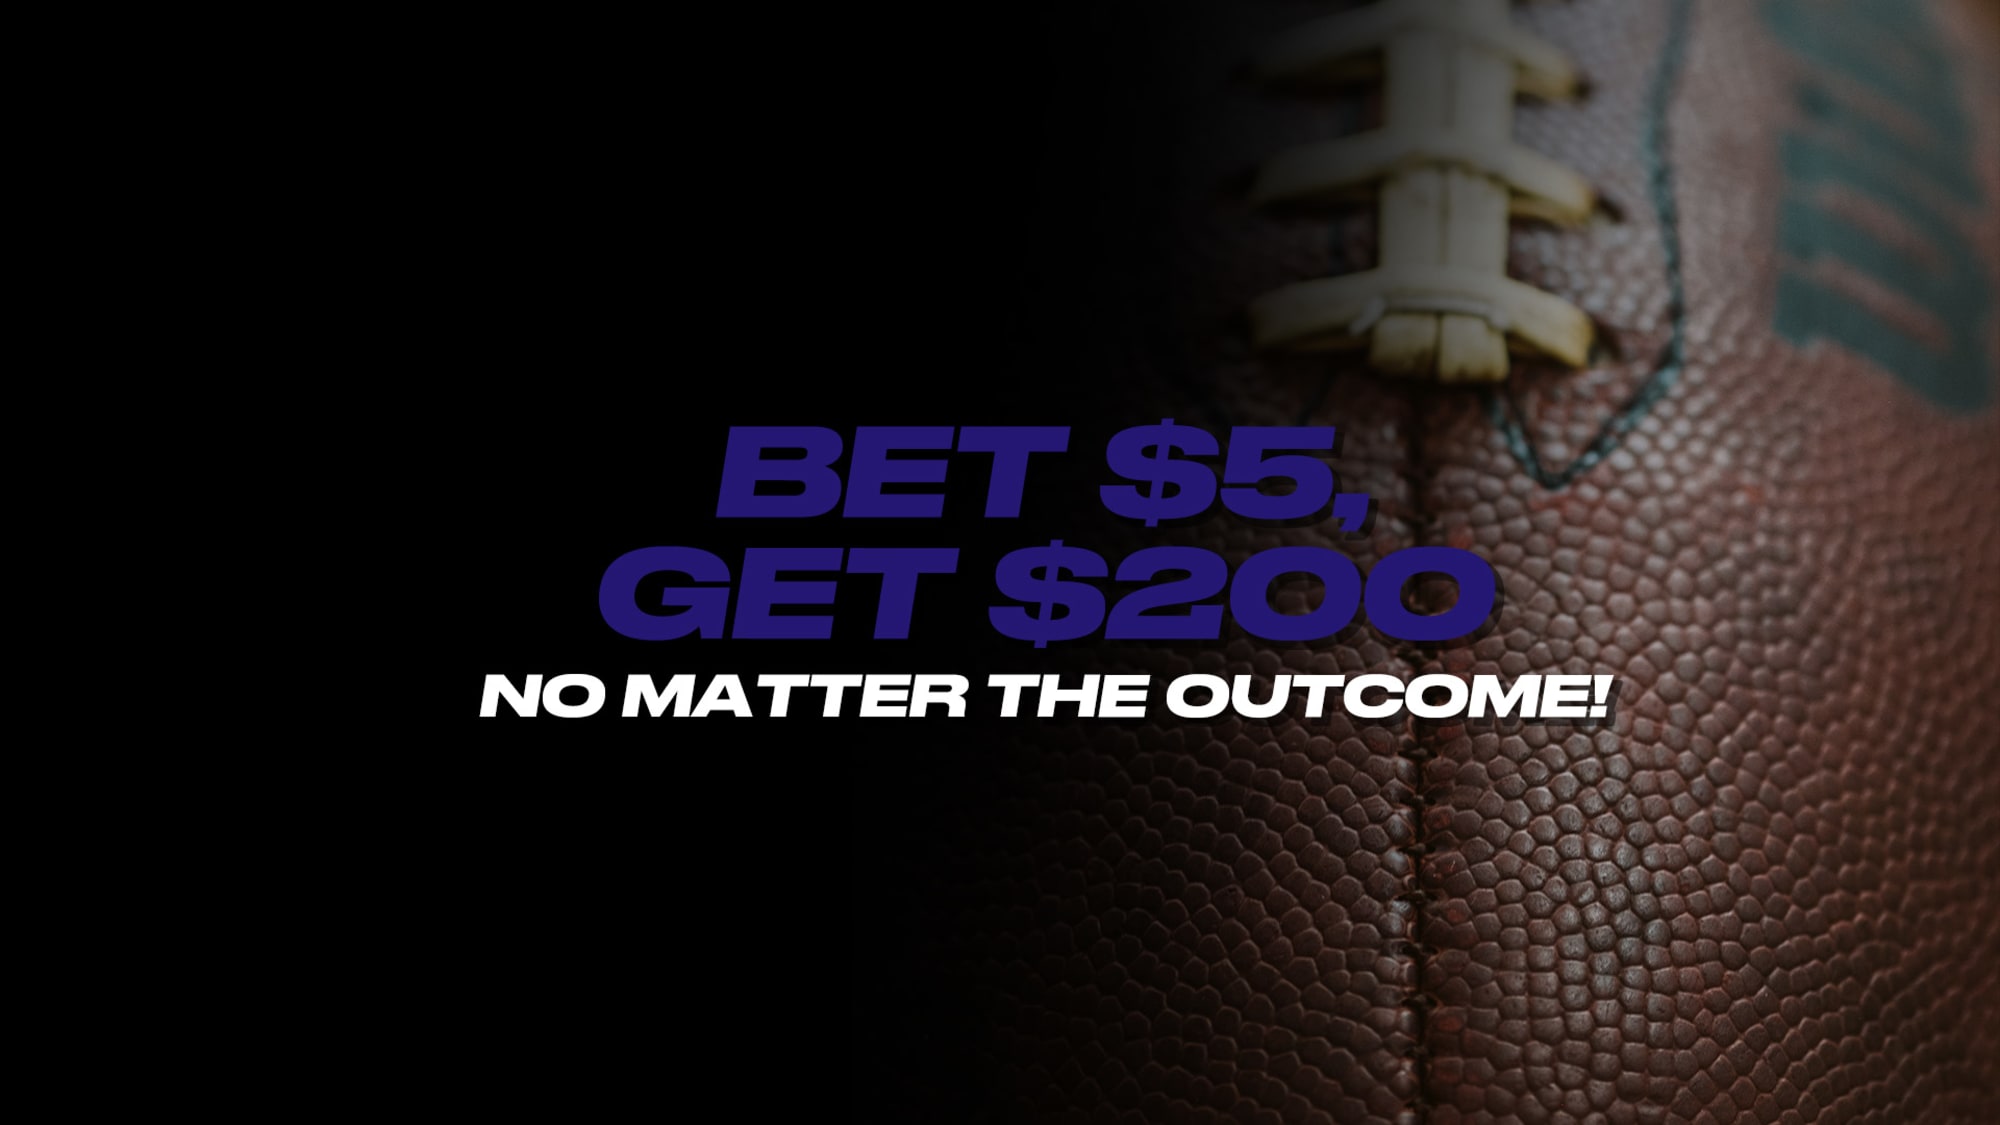 Ravens Fans: Bet $5, Win $200 With Our Exclusive DraftKings Maryland Promo Code